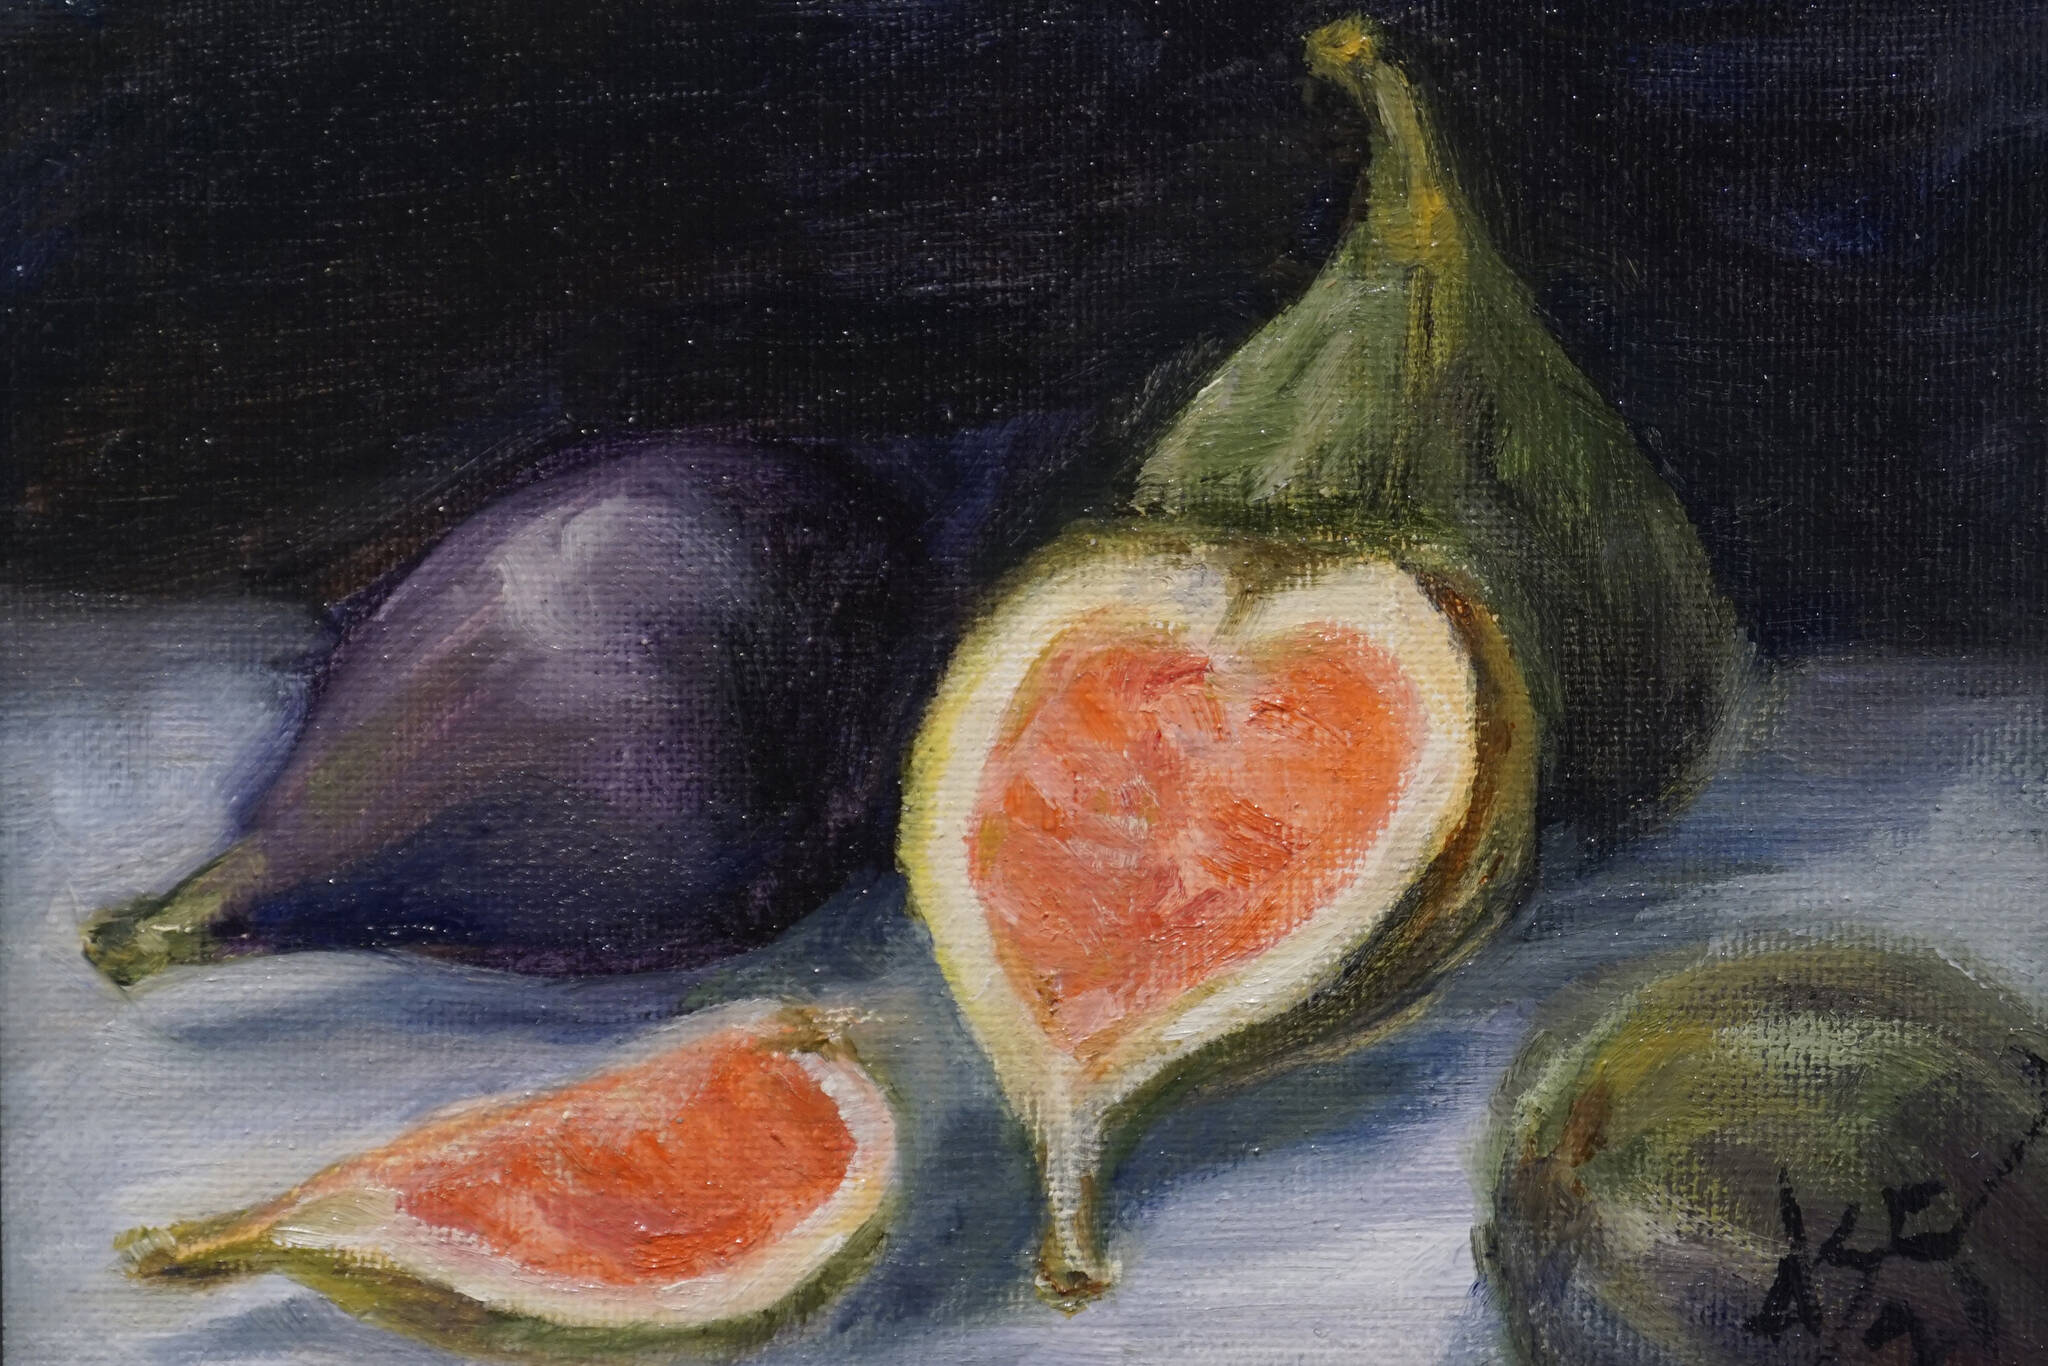 Dianne Spence-Chorman's "Fig Study" is one of the works showing in the Homer Council on the Arts "Fun wtih 5x7" show through Dec. 22, 2021, at the gallery in Homer, Alaska. (Photo by Michael Armstrong/Homer News)